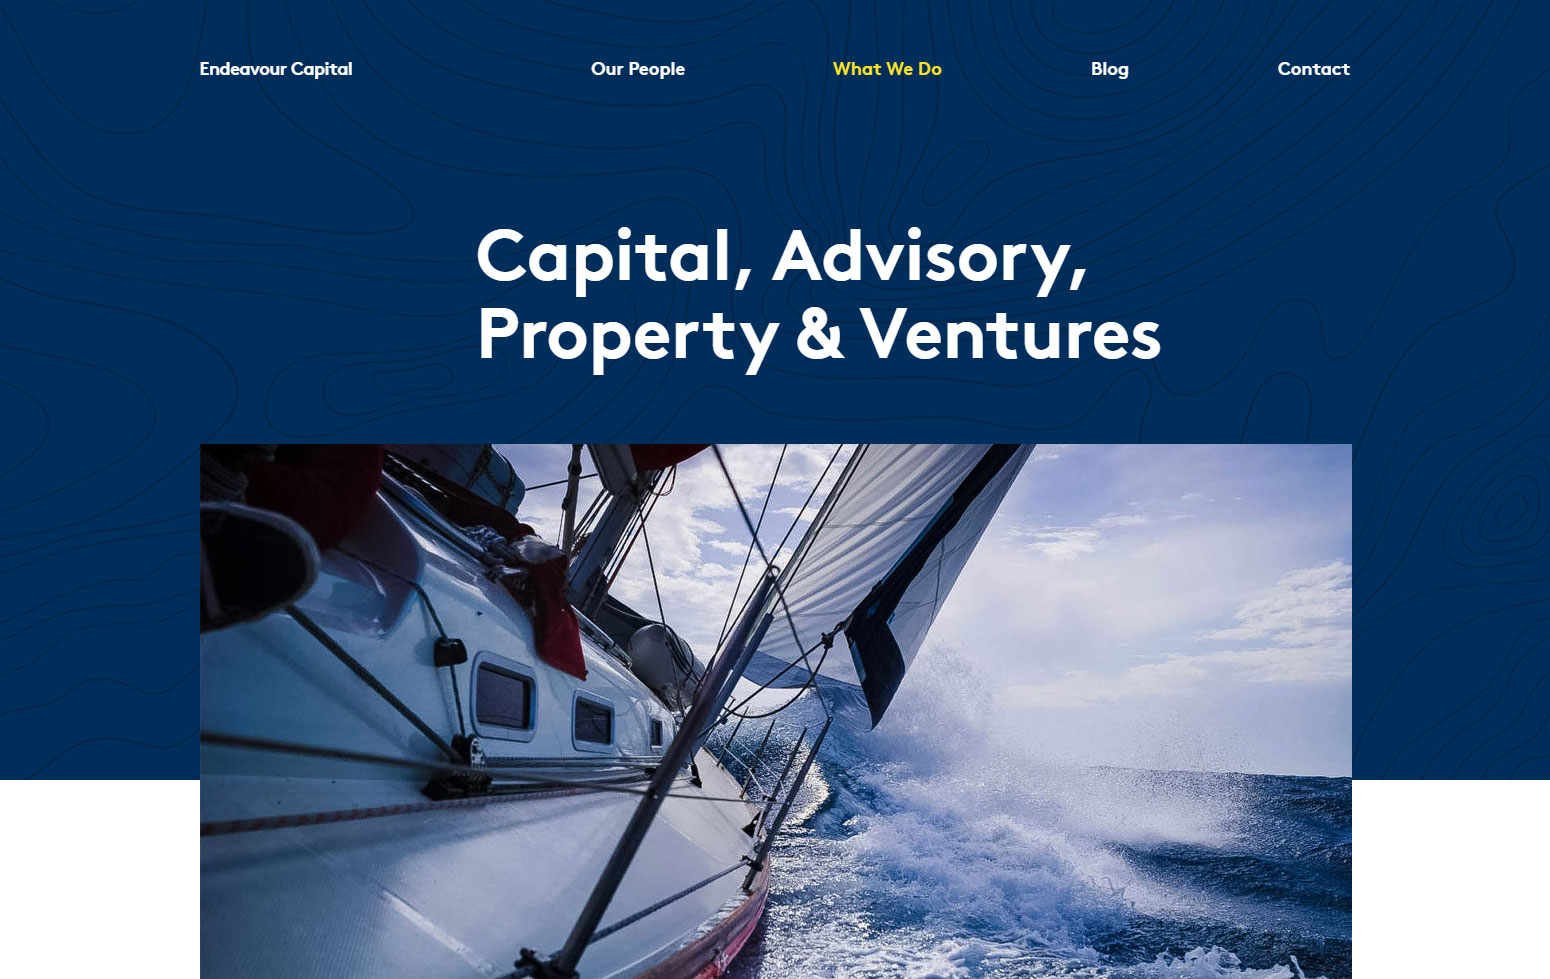 Endeavour Capital - Website of the Day